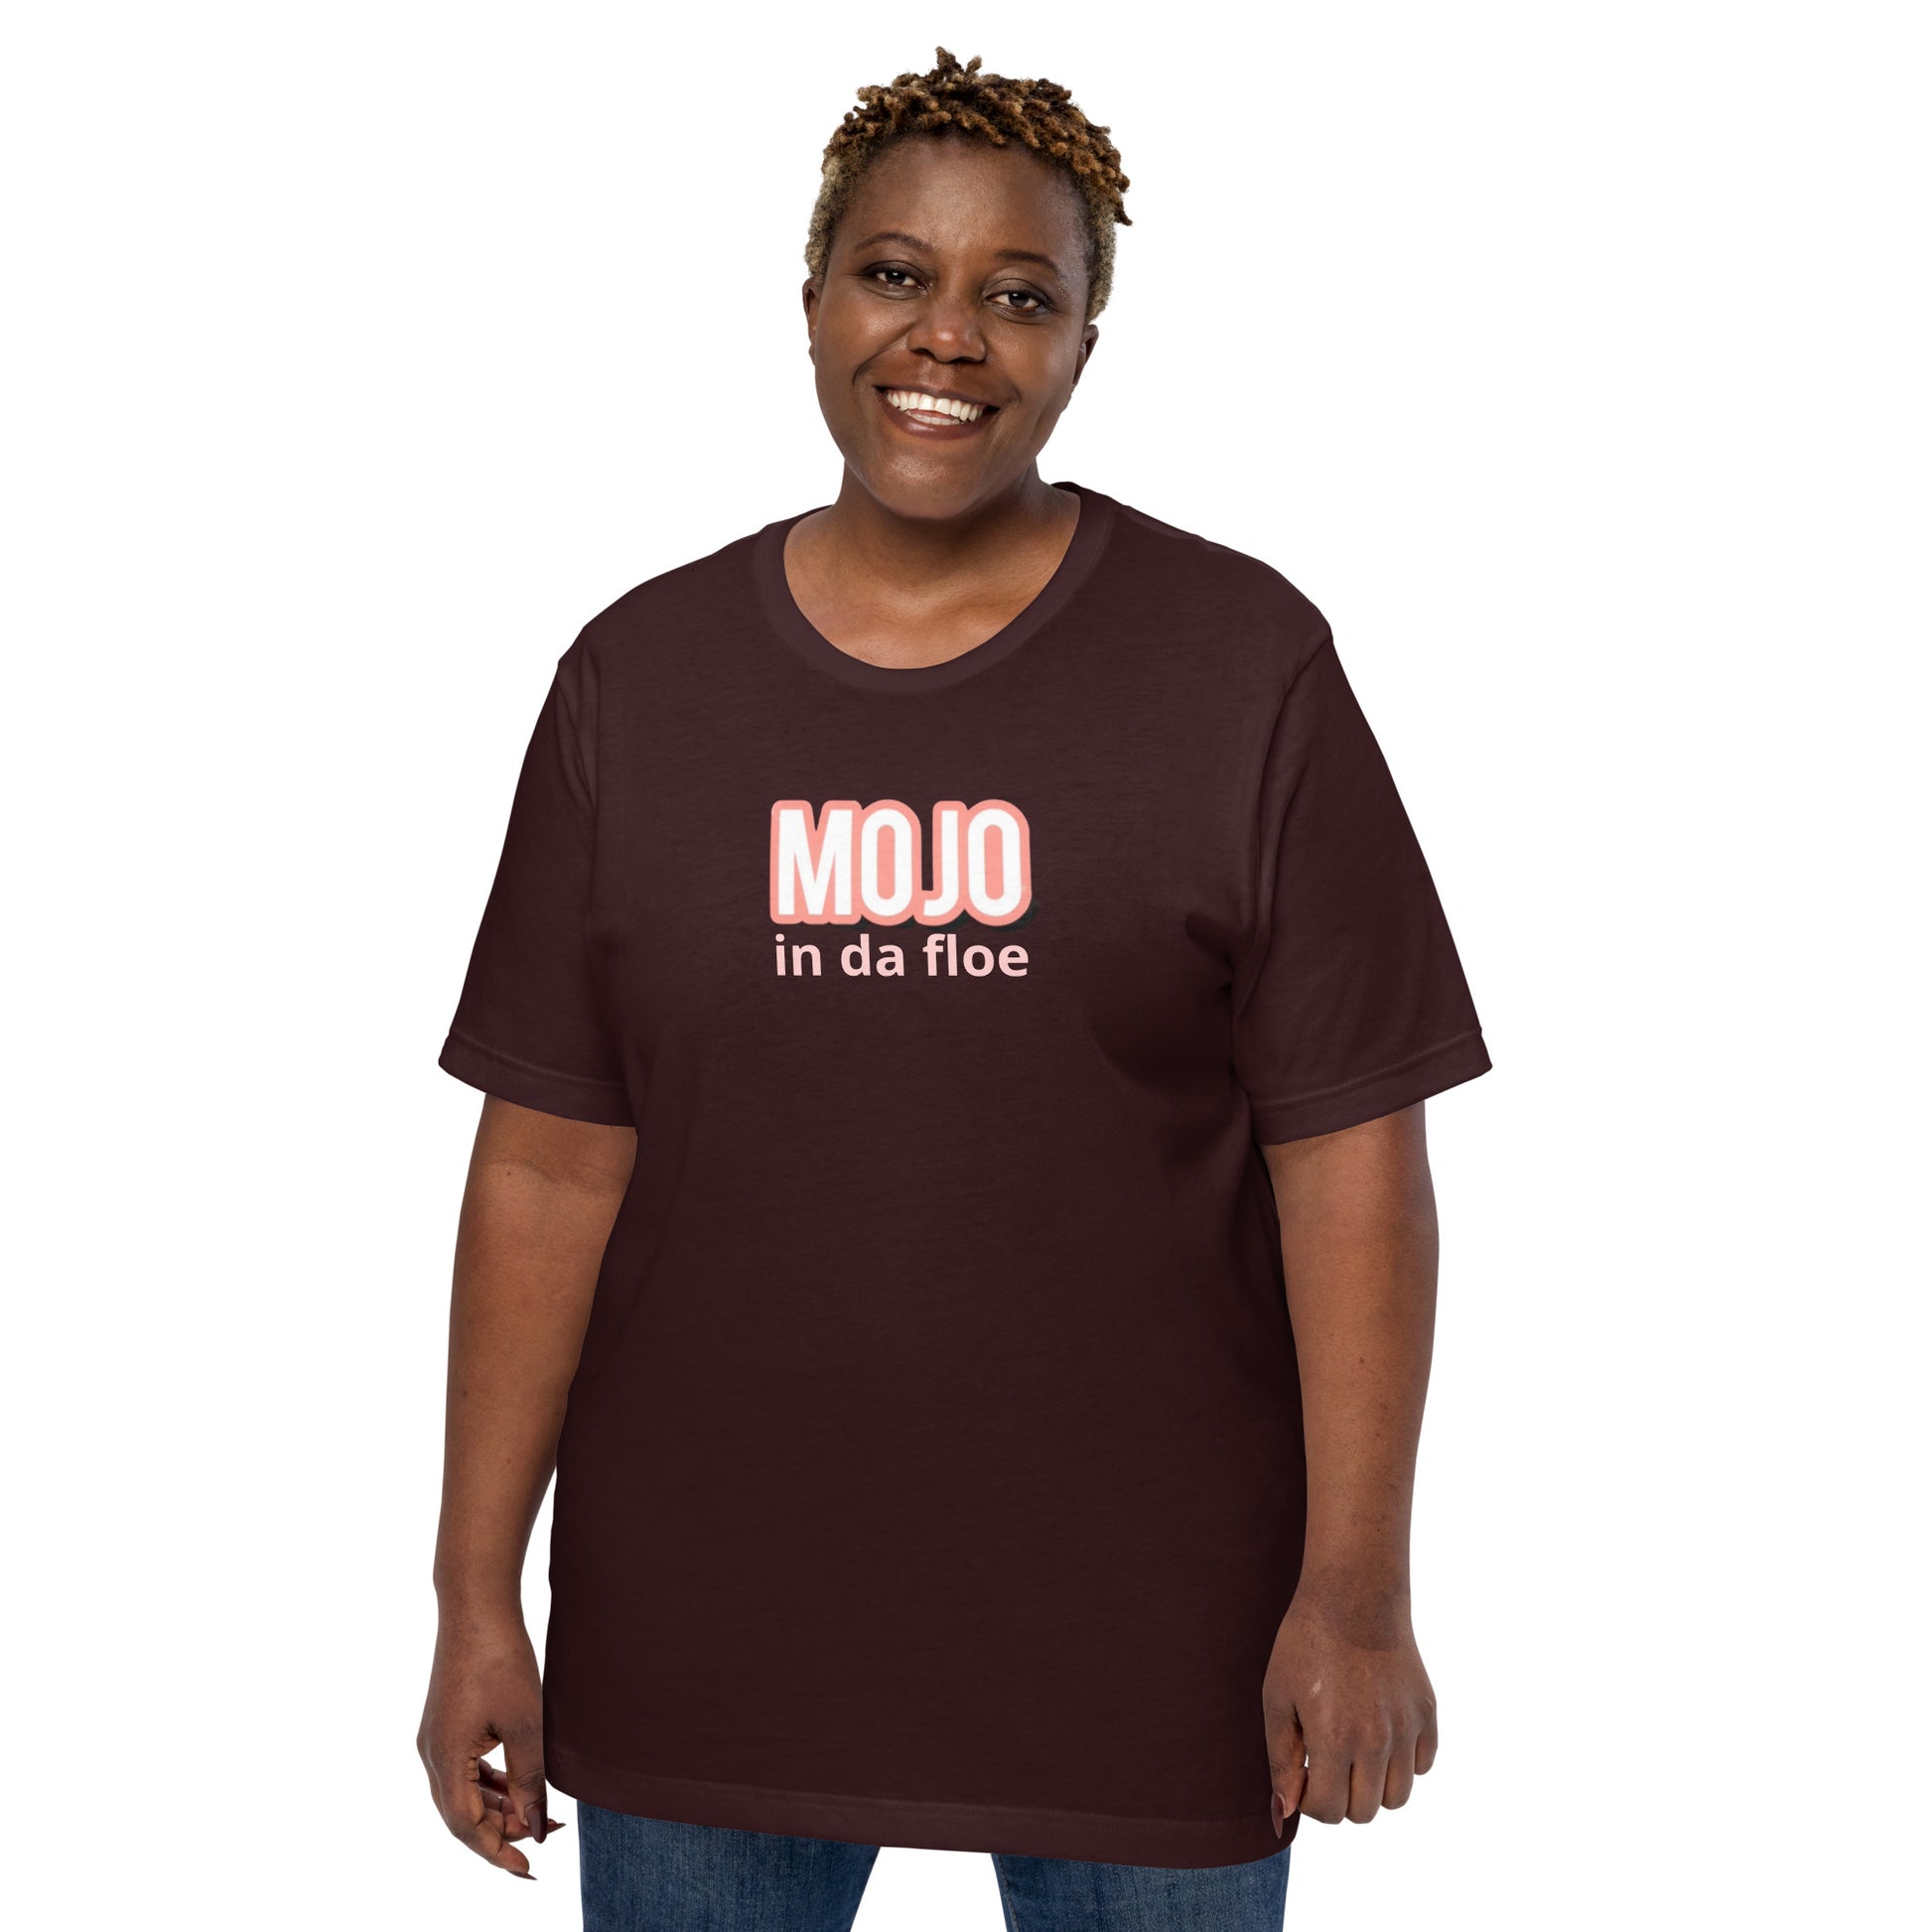 Motivate Merch for the Plus Size Artist who seeks the spotlight